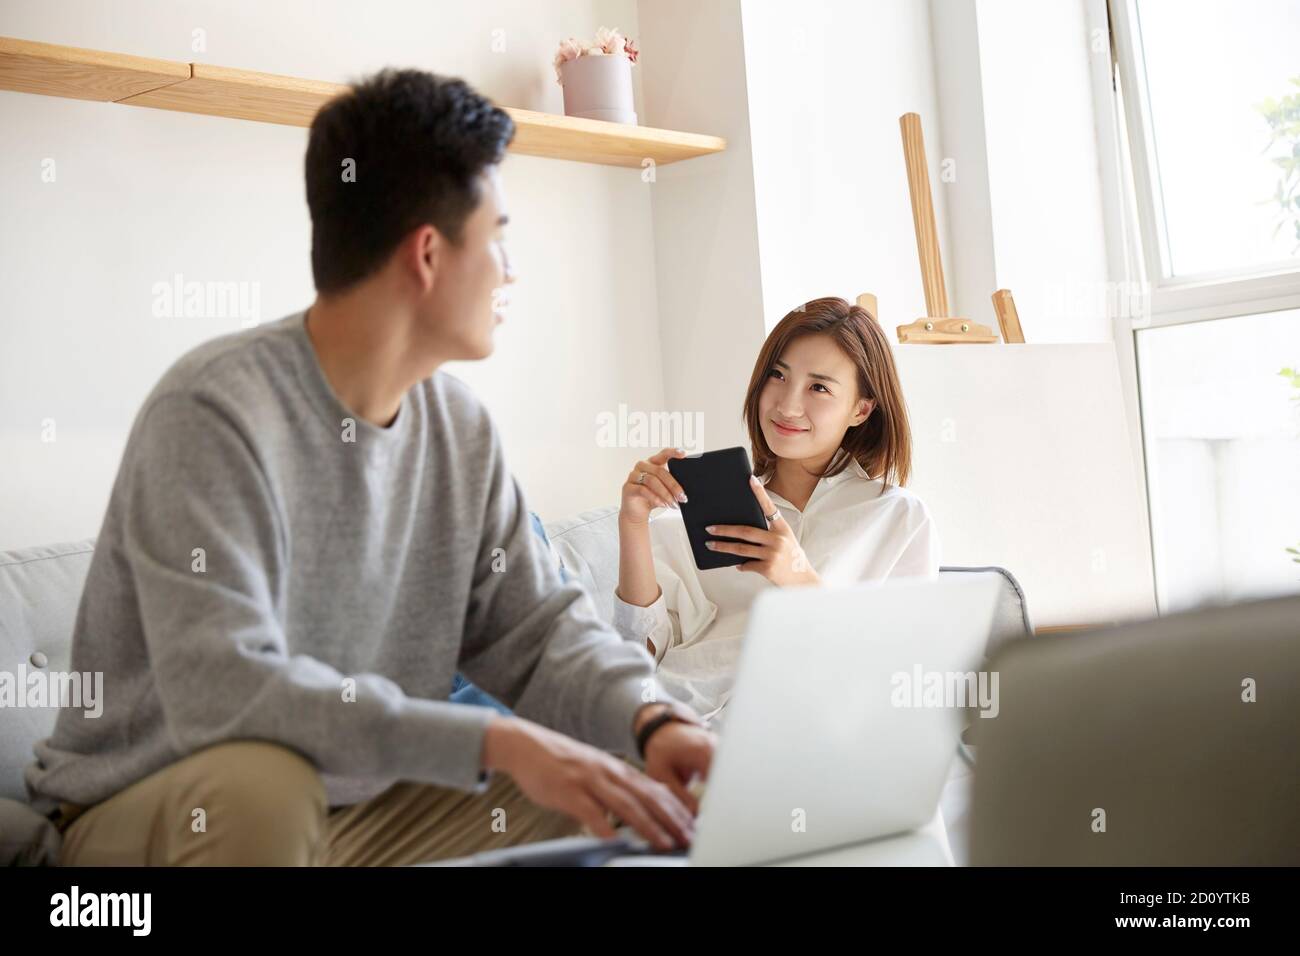 happy and relaxed young asian couple chatting conversing while staying at home Stock Photo